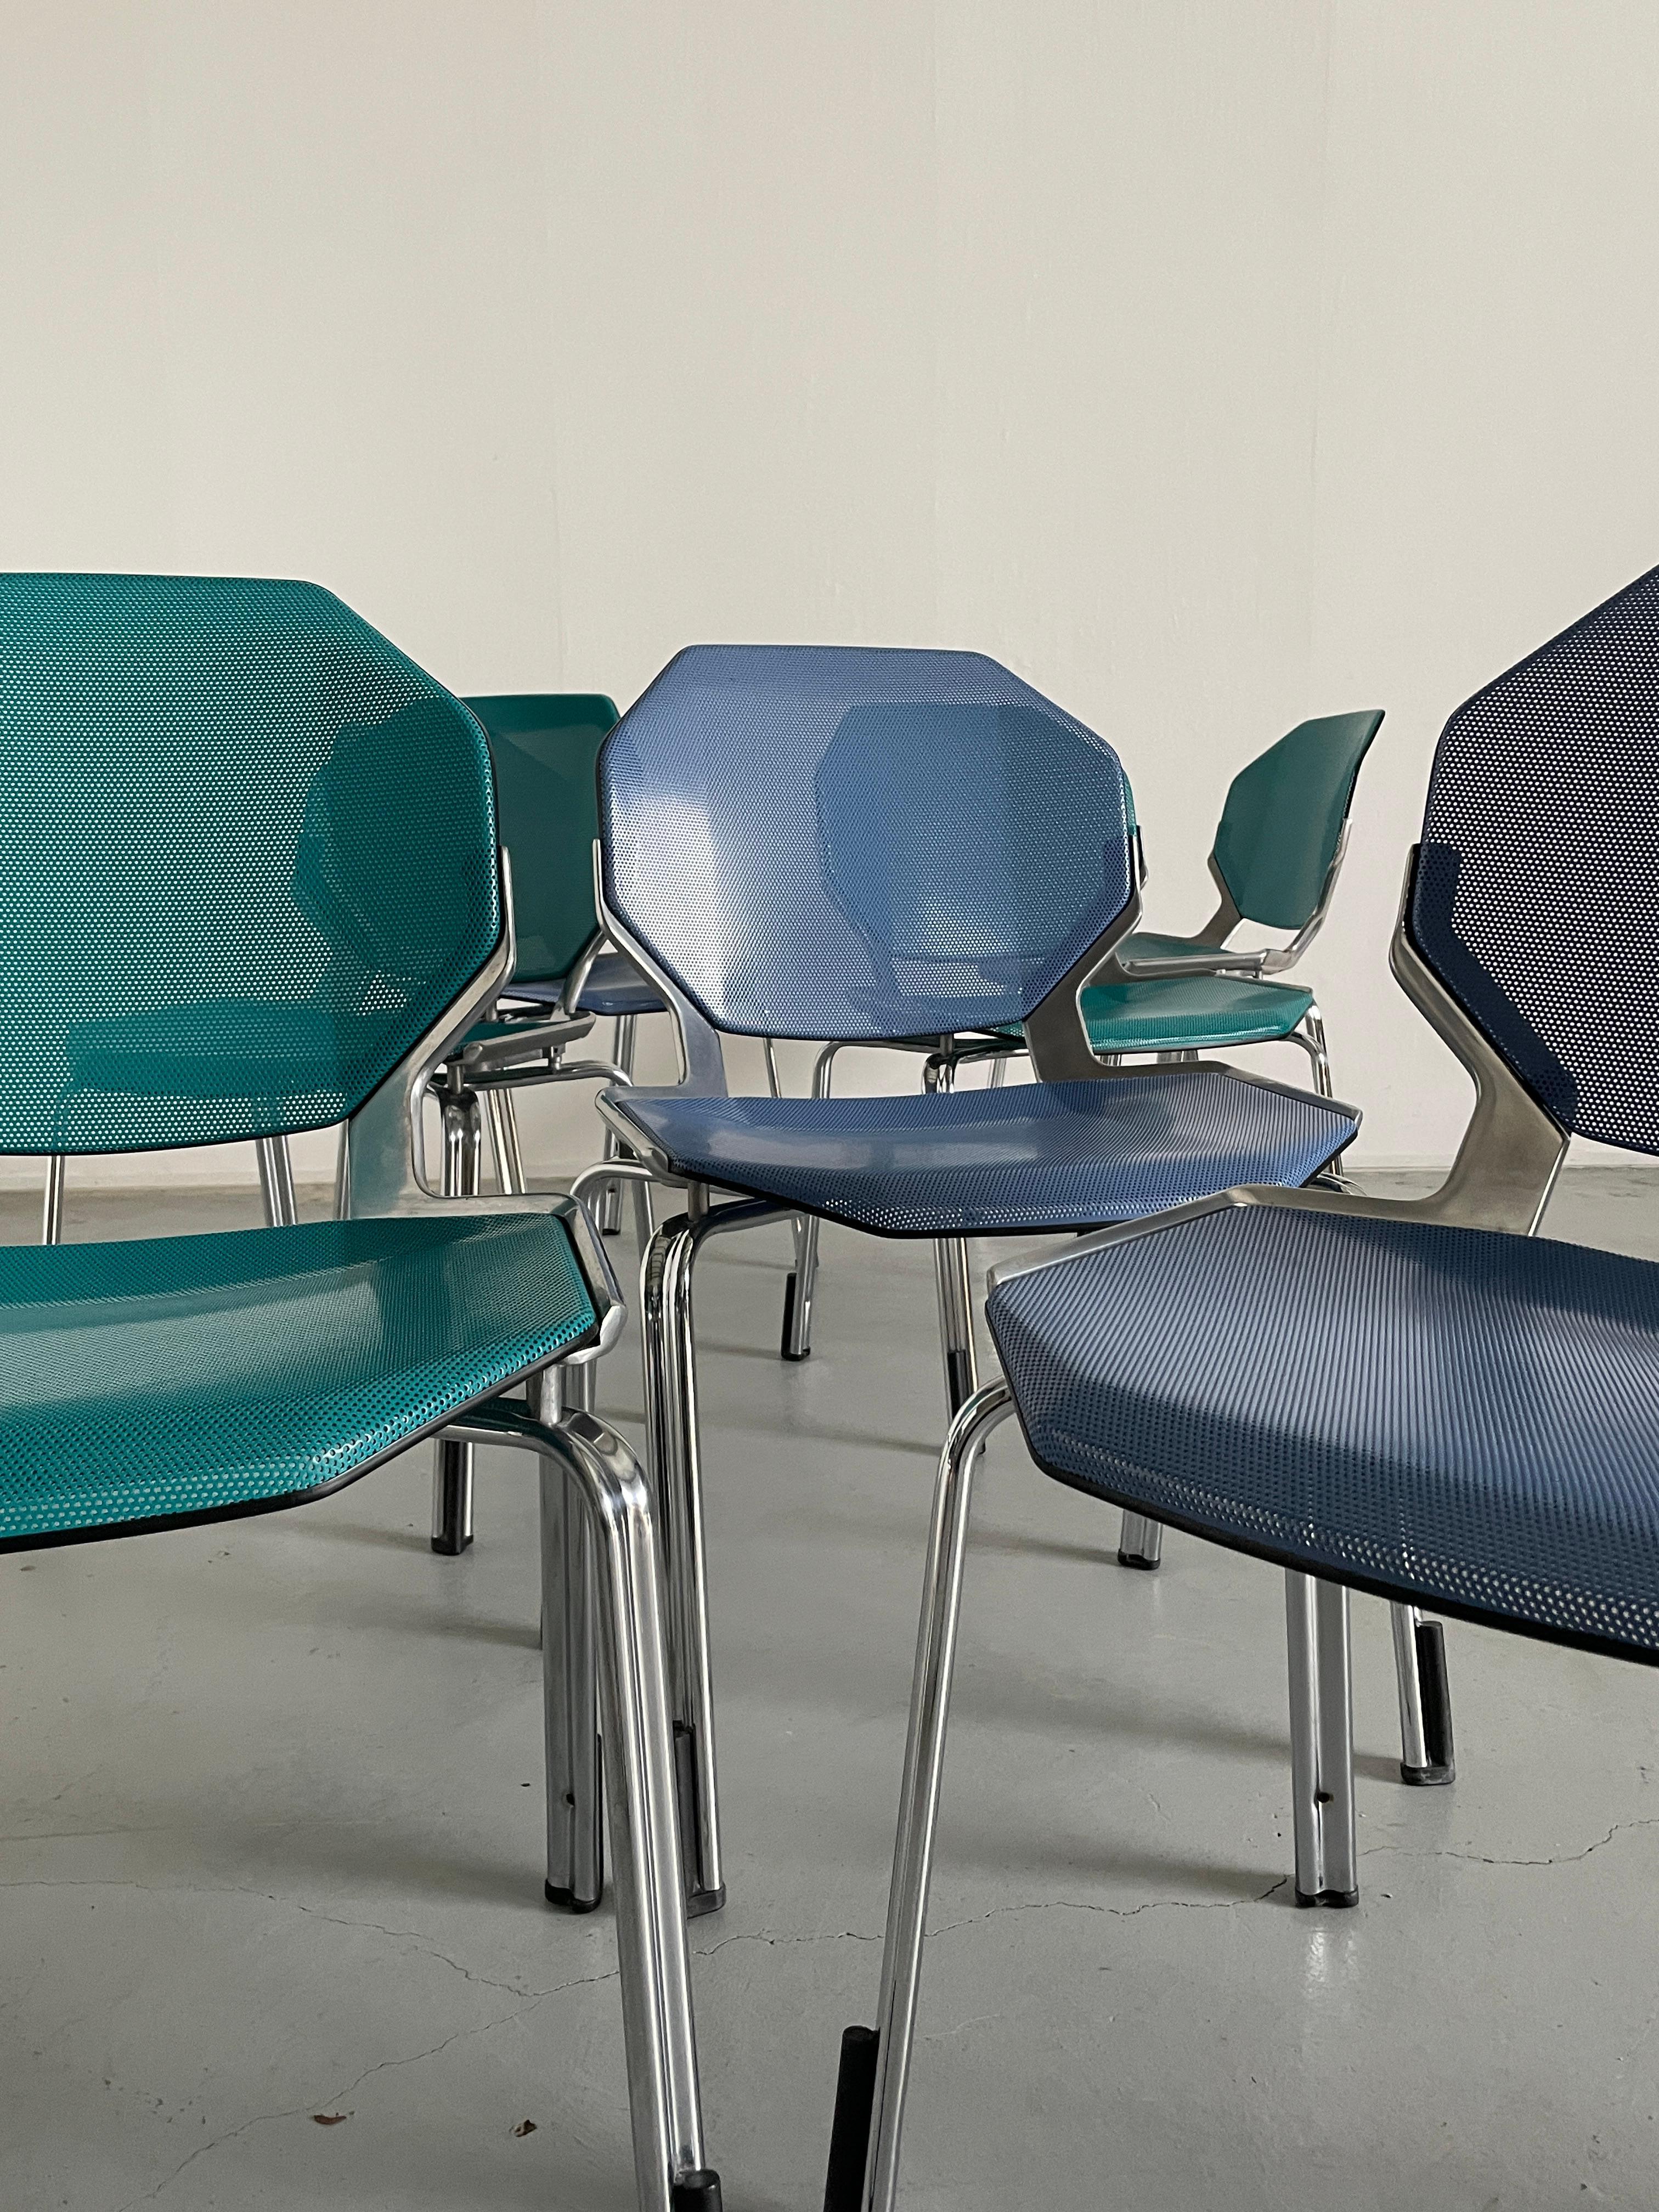 Space Age Futuristic Octagonal Stackable Dining Chairs by Fröscher Sitform, 90s For Sale 7